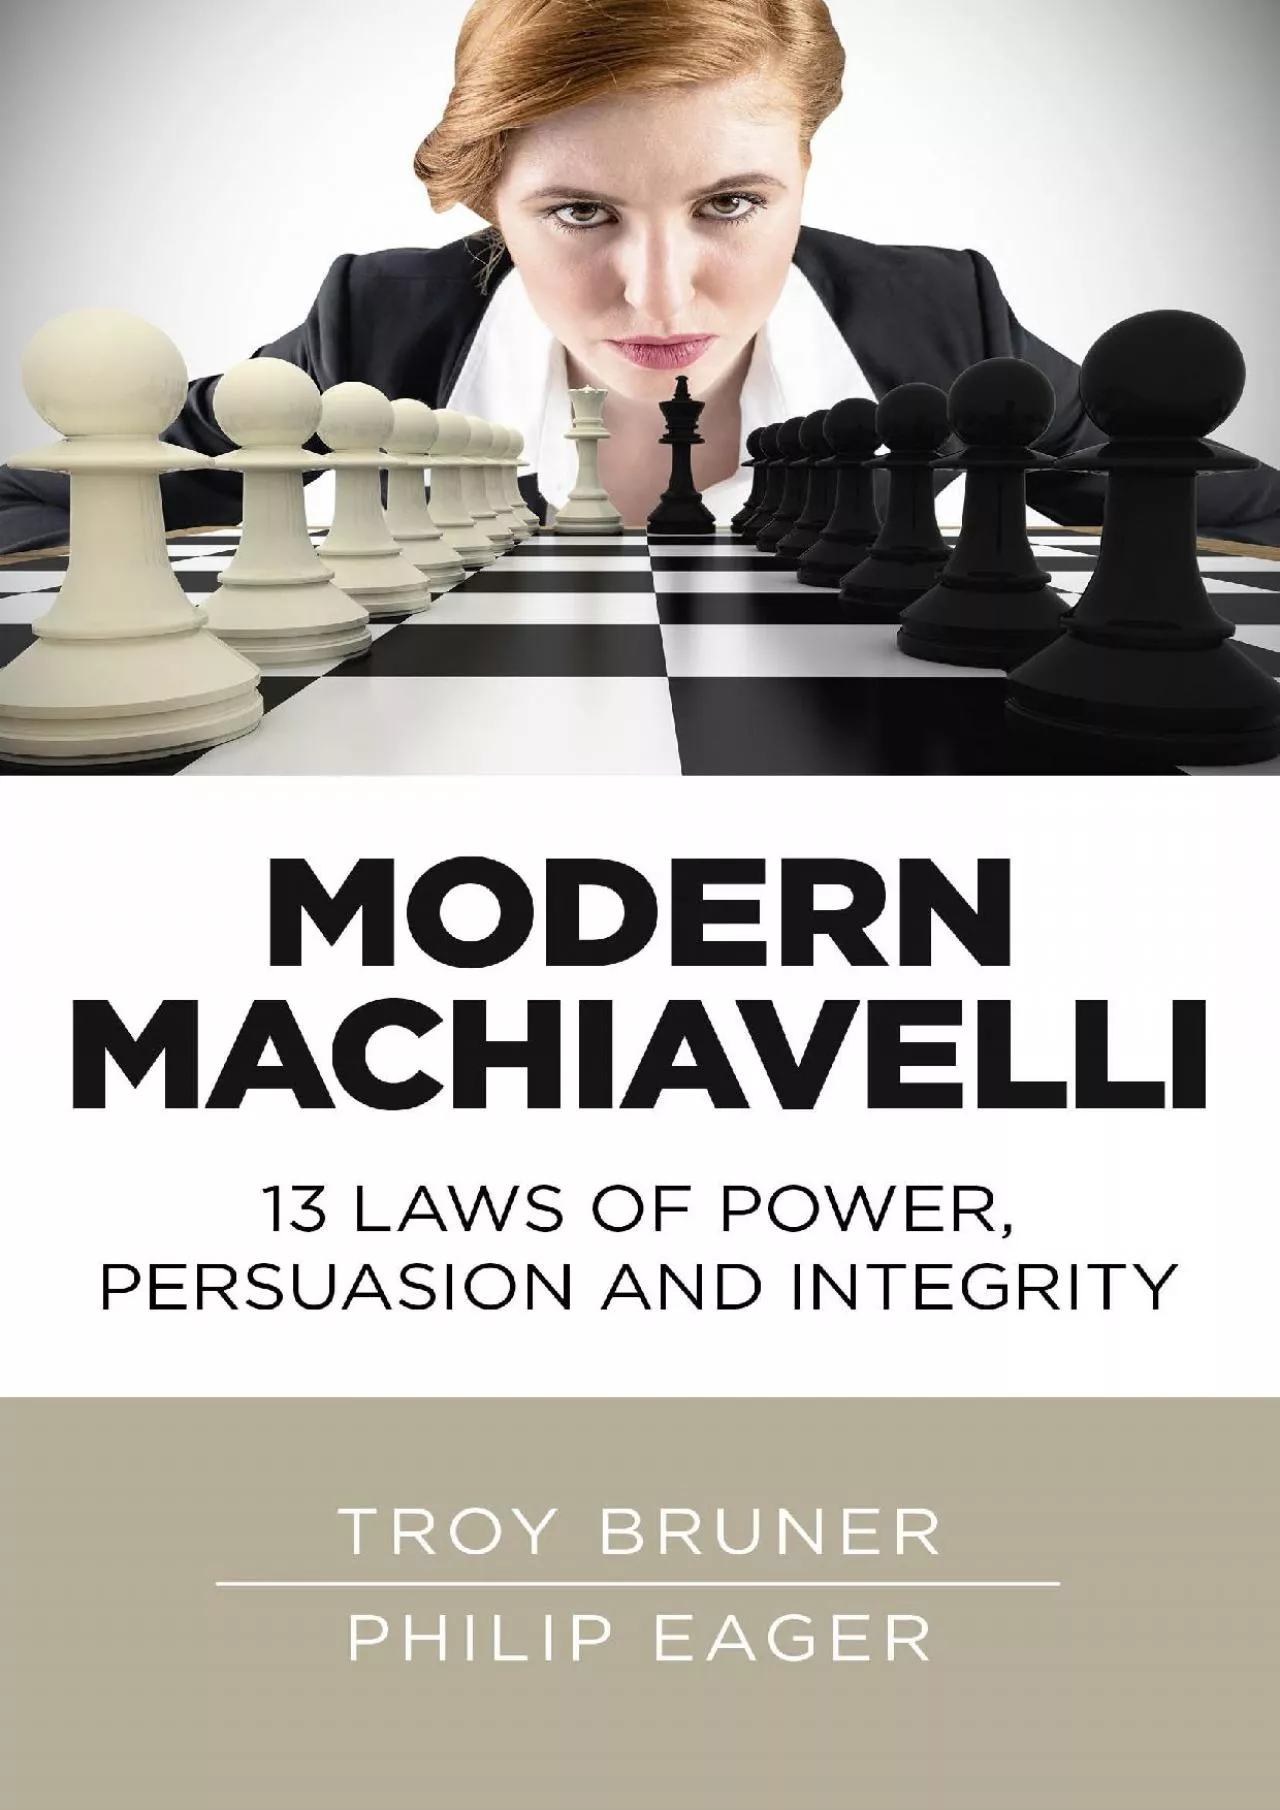 (BOOS)-Modern Machiavelli: 13 Laws of Power, Persuasion and Integrity